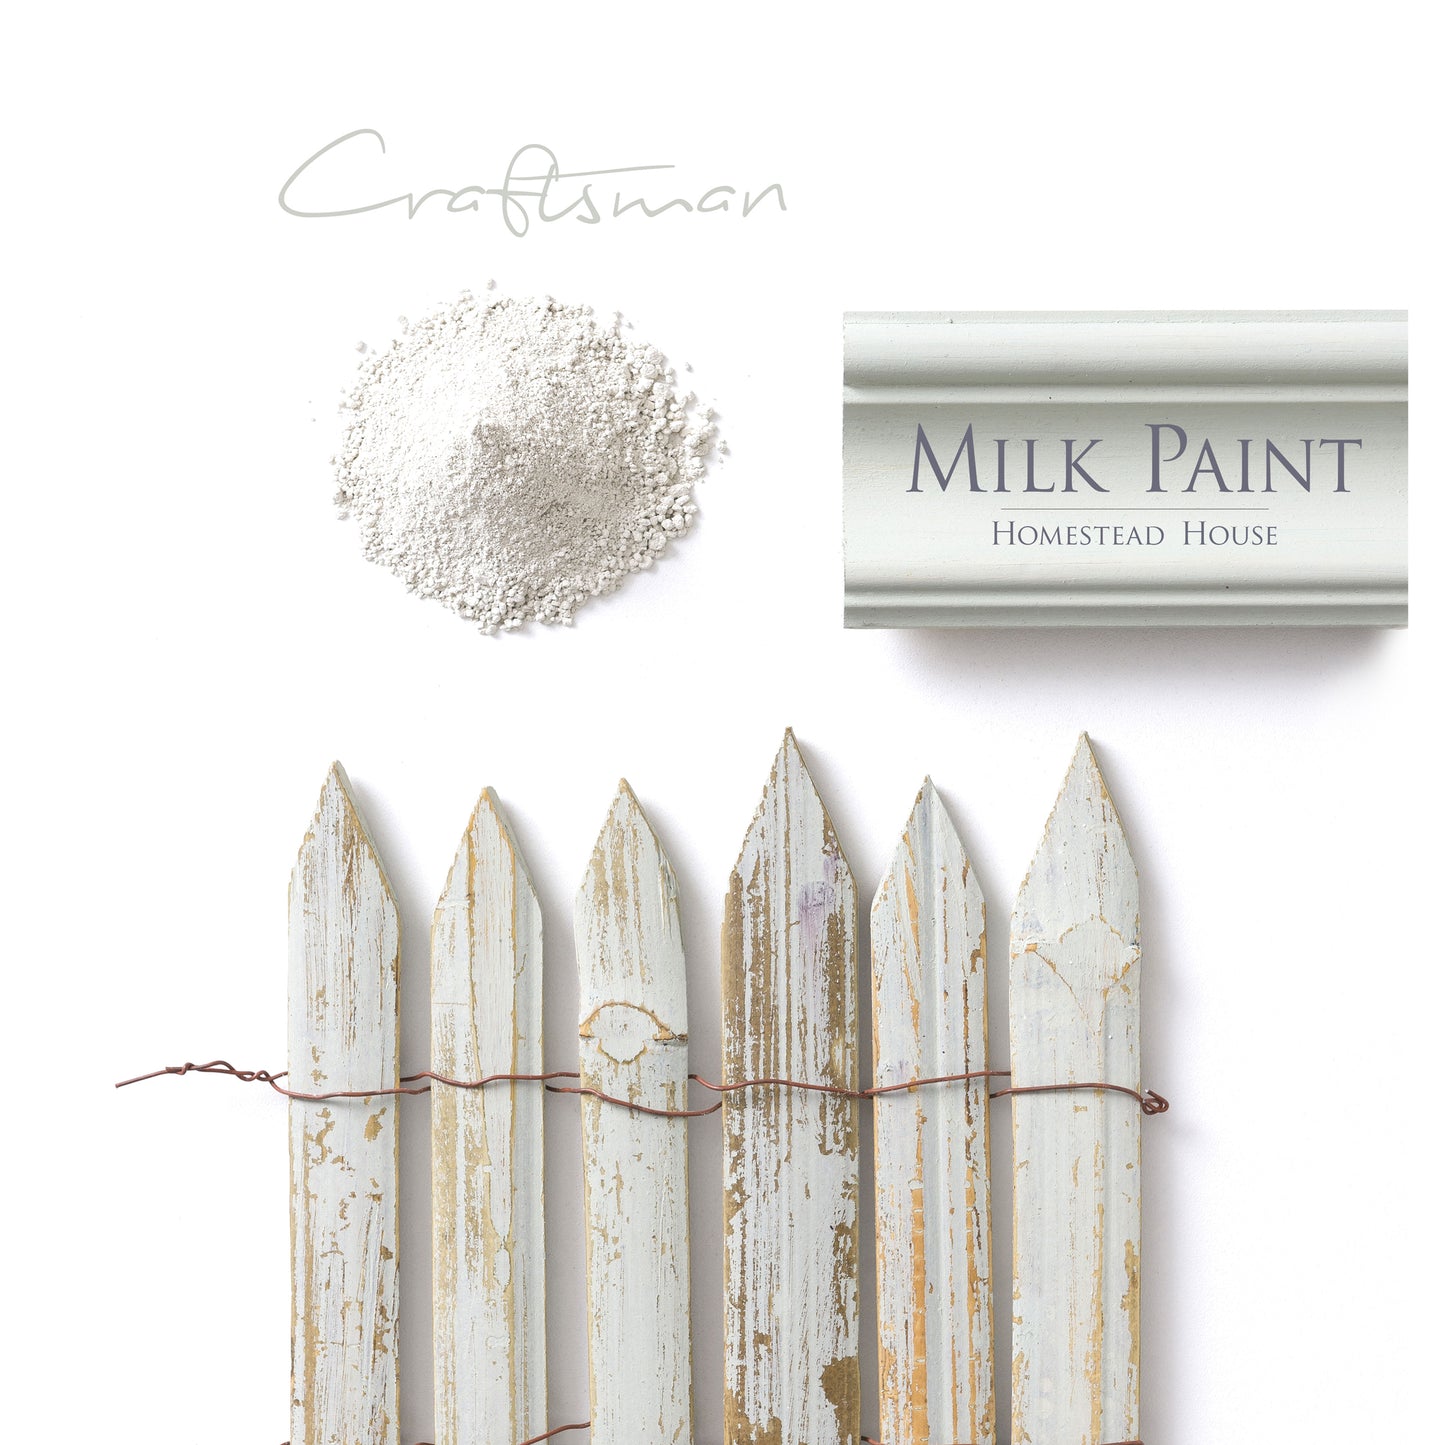 Milk Paint from Homestead House in Craftsman, A mid-tone green with a slight yellow ochre hue. | homesteadhouse.ca